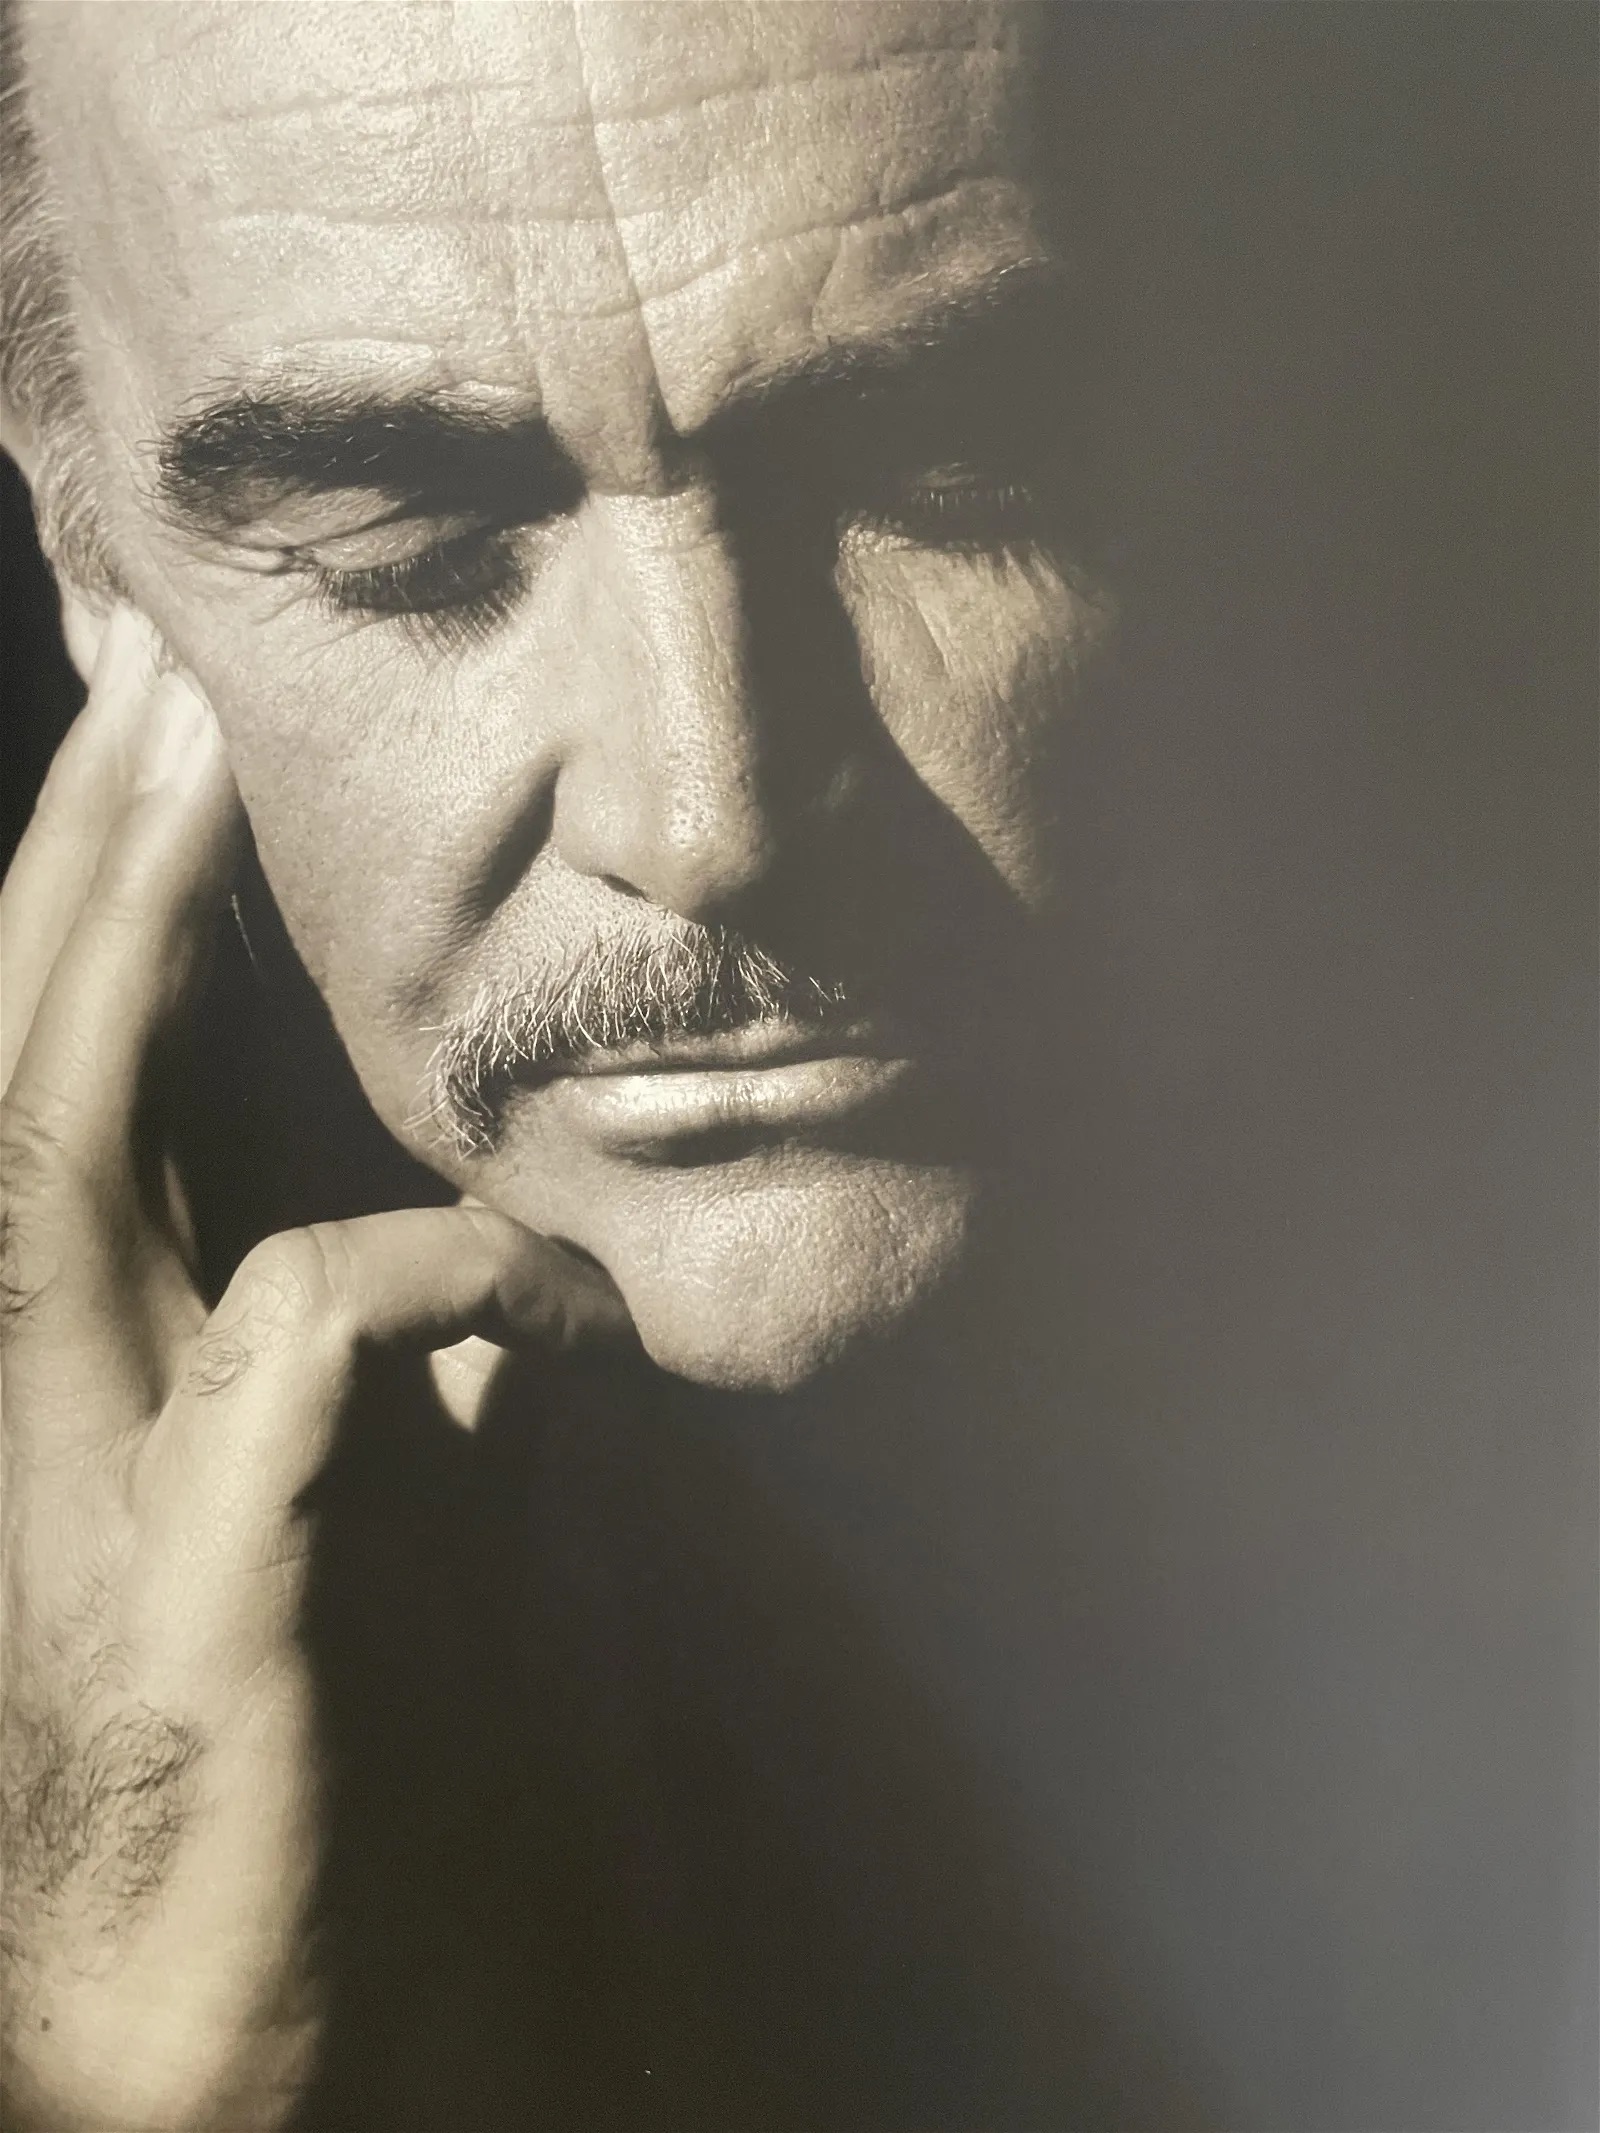 Herb Ritts "Sean Connery, Hollywood, 1989" Print - Image 2 of 6